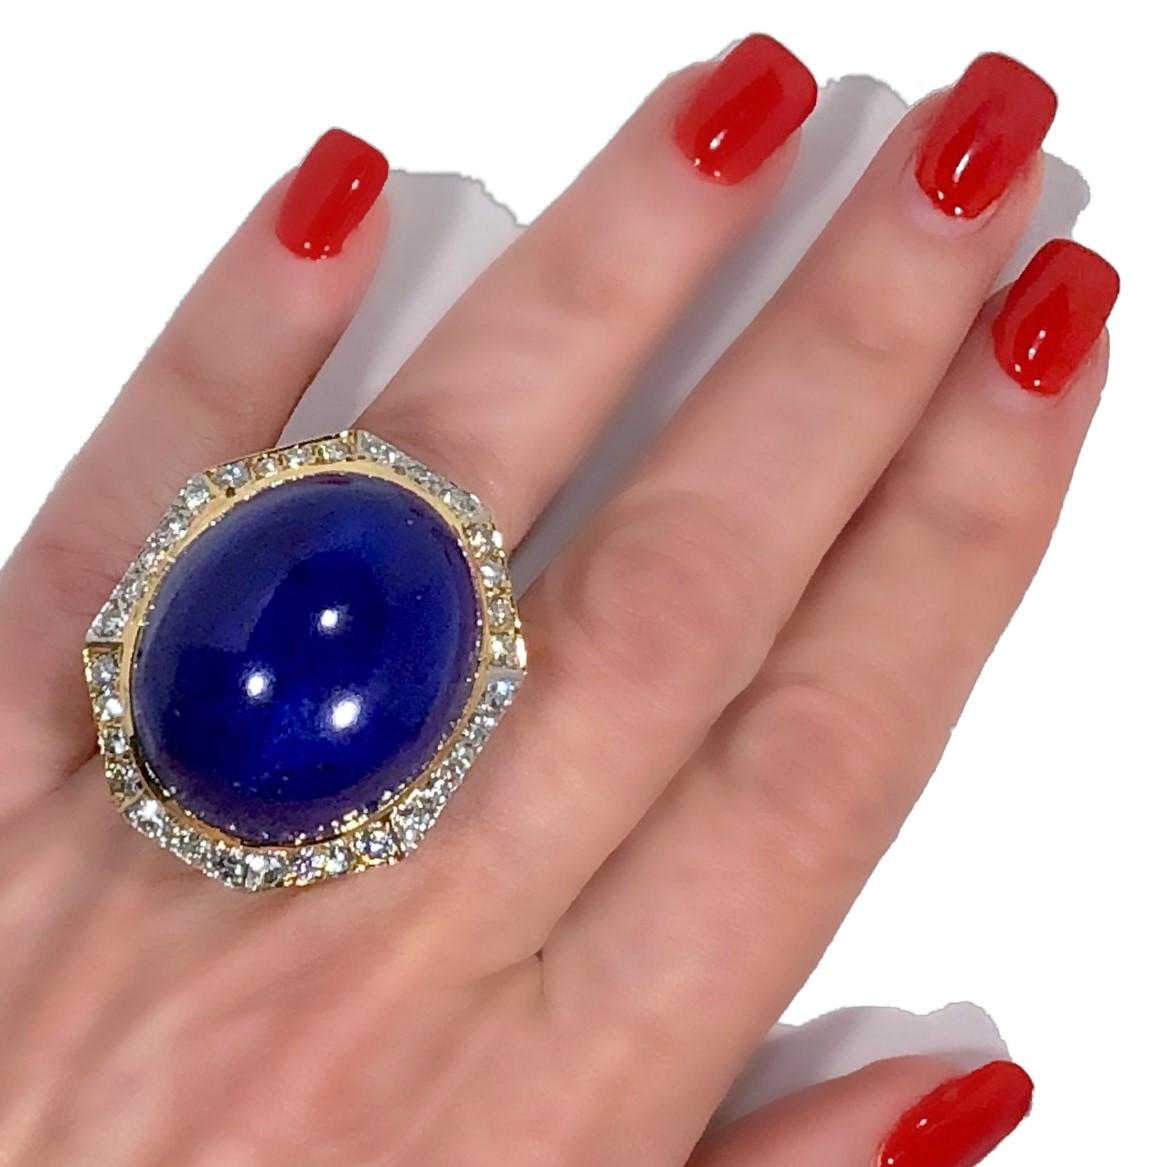 Massive Gold Cocktail Ring with 86 Carat Lapis-Lazuli Cabochon and Diamonds 7